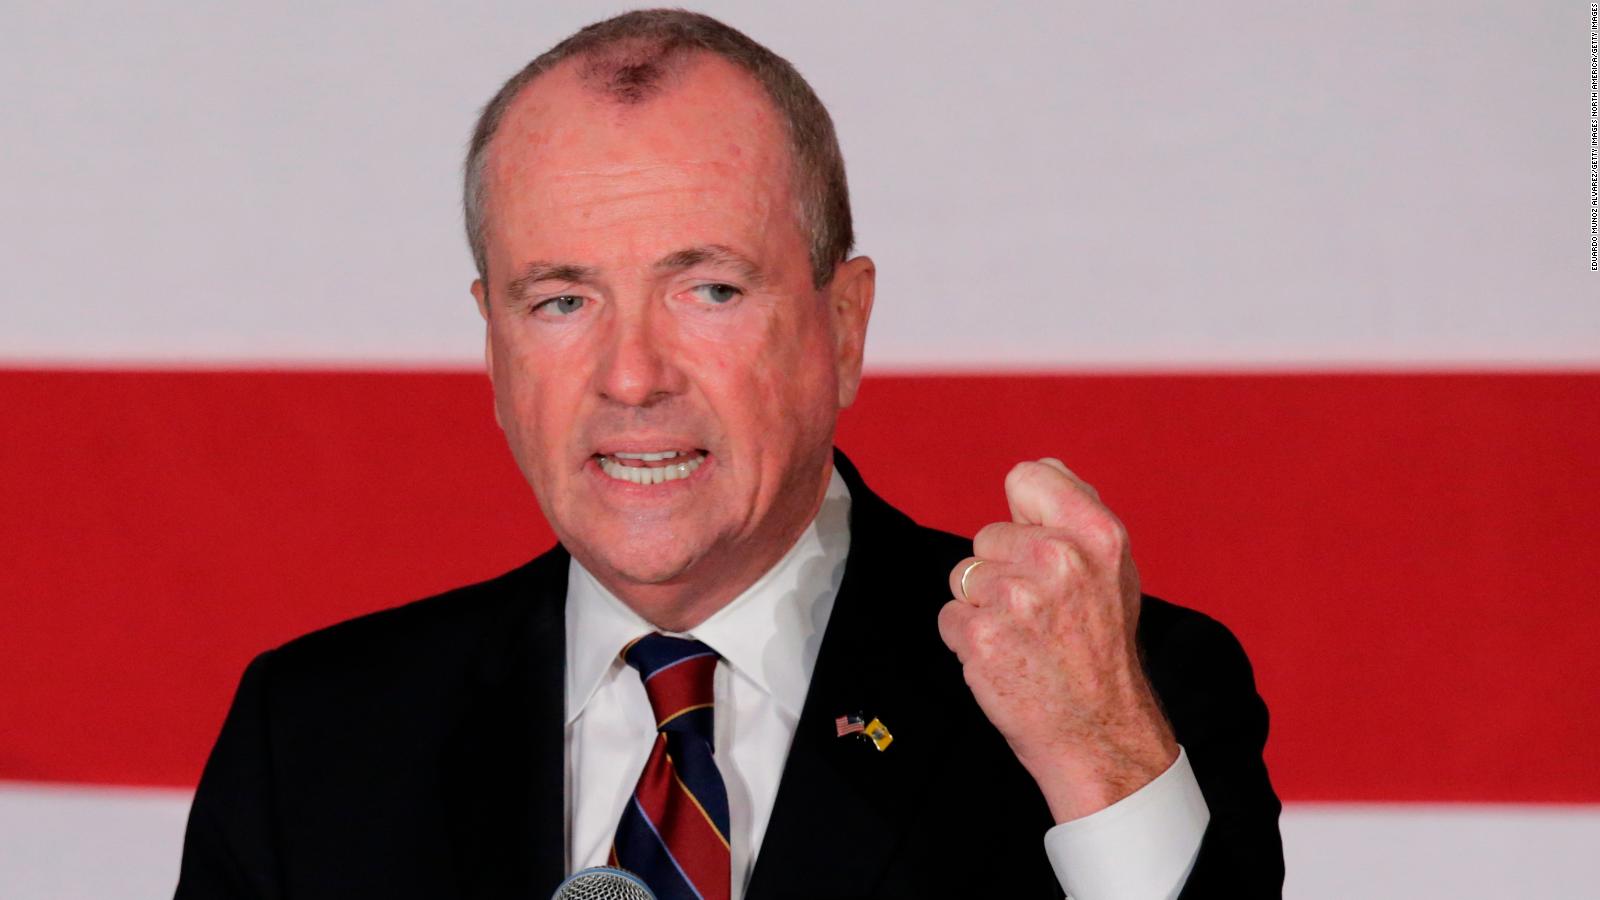 who won governor of new jersey